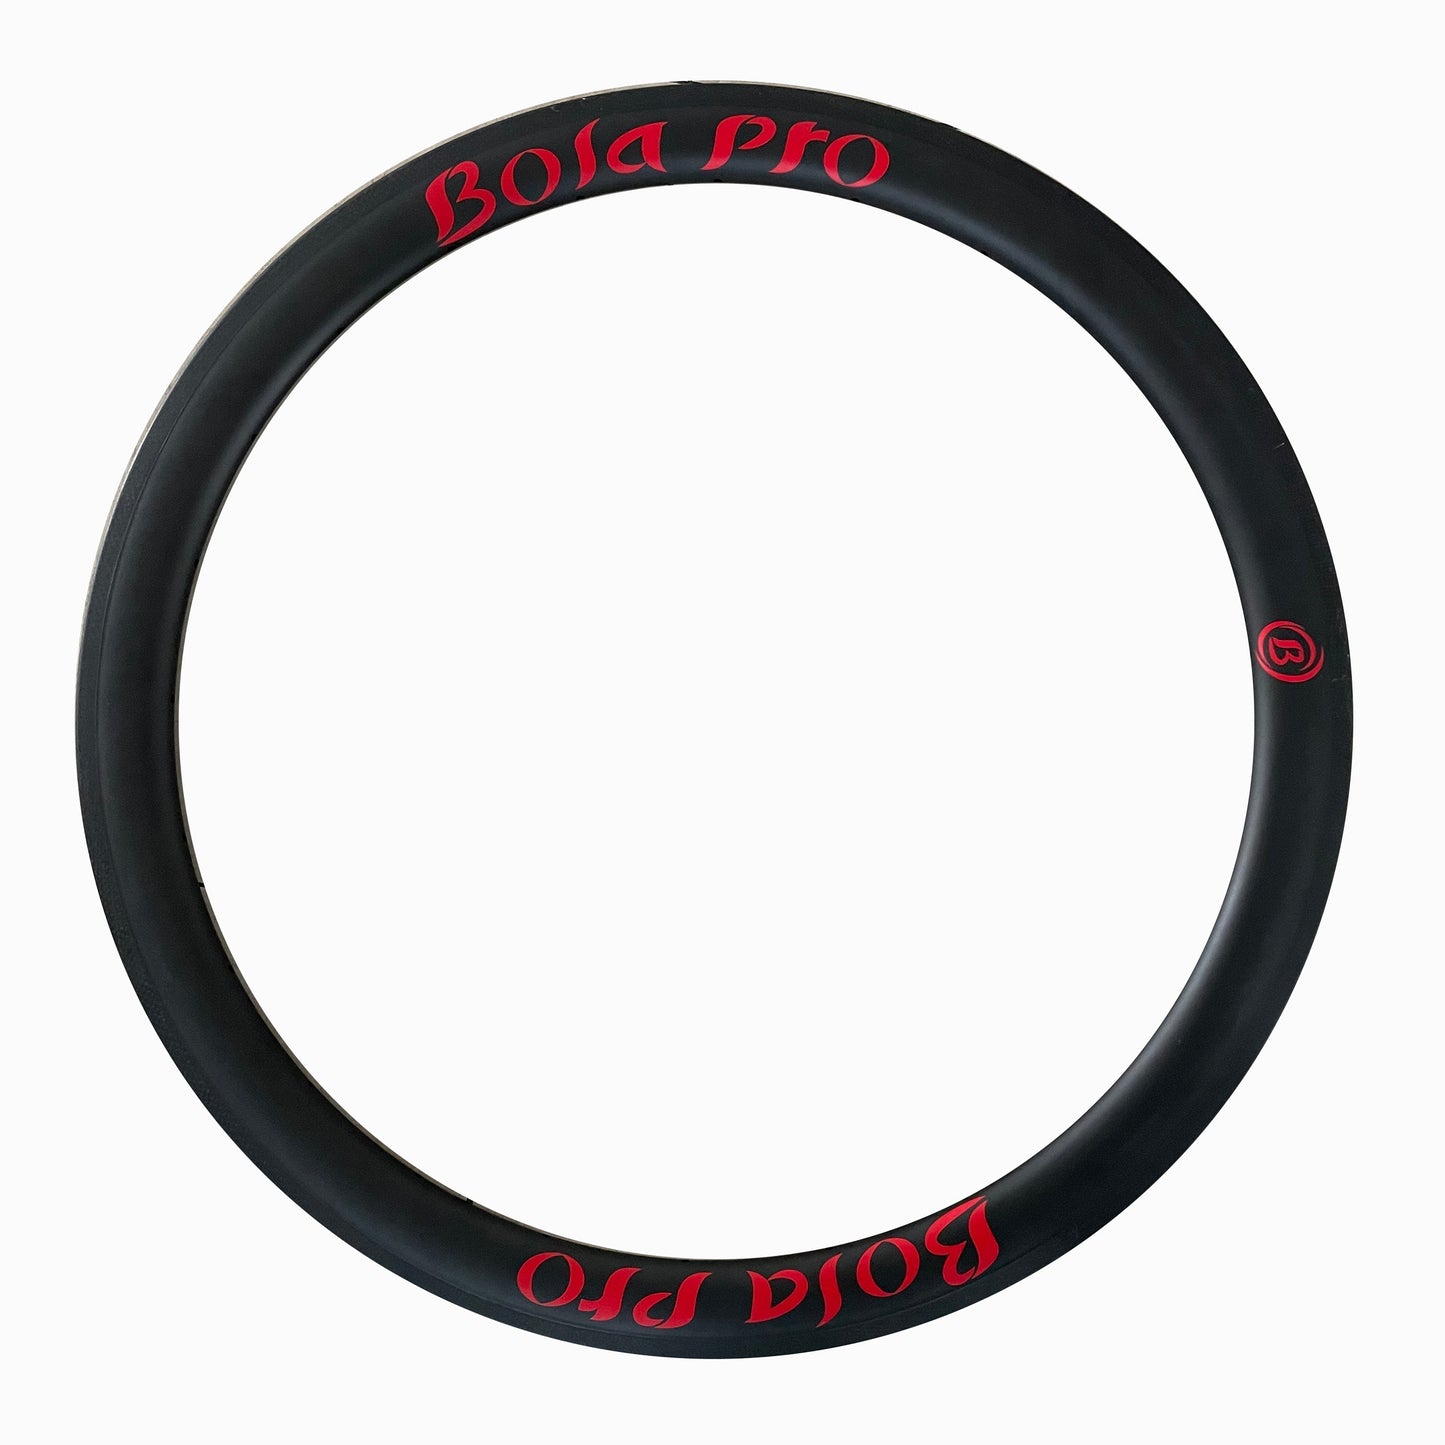 Offset 29 inch extralight MTB tubeless hookless carbon bicicleta rim 23mm low profile 28mm inner wide for cross-country or mountain riding Bola